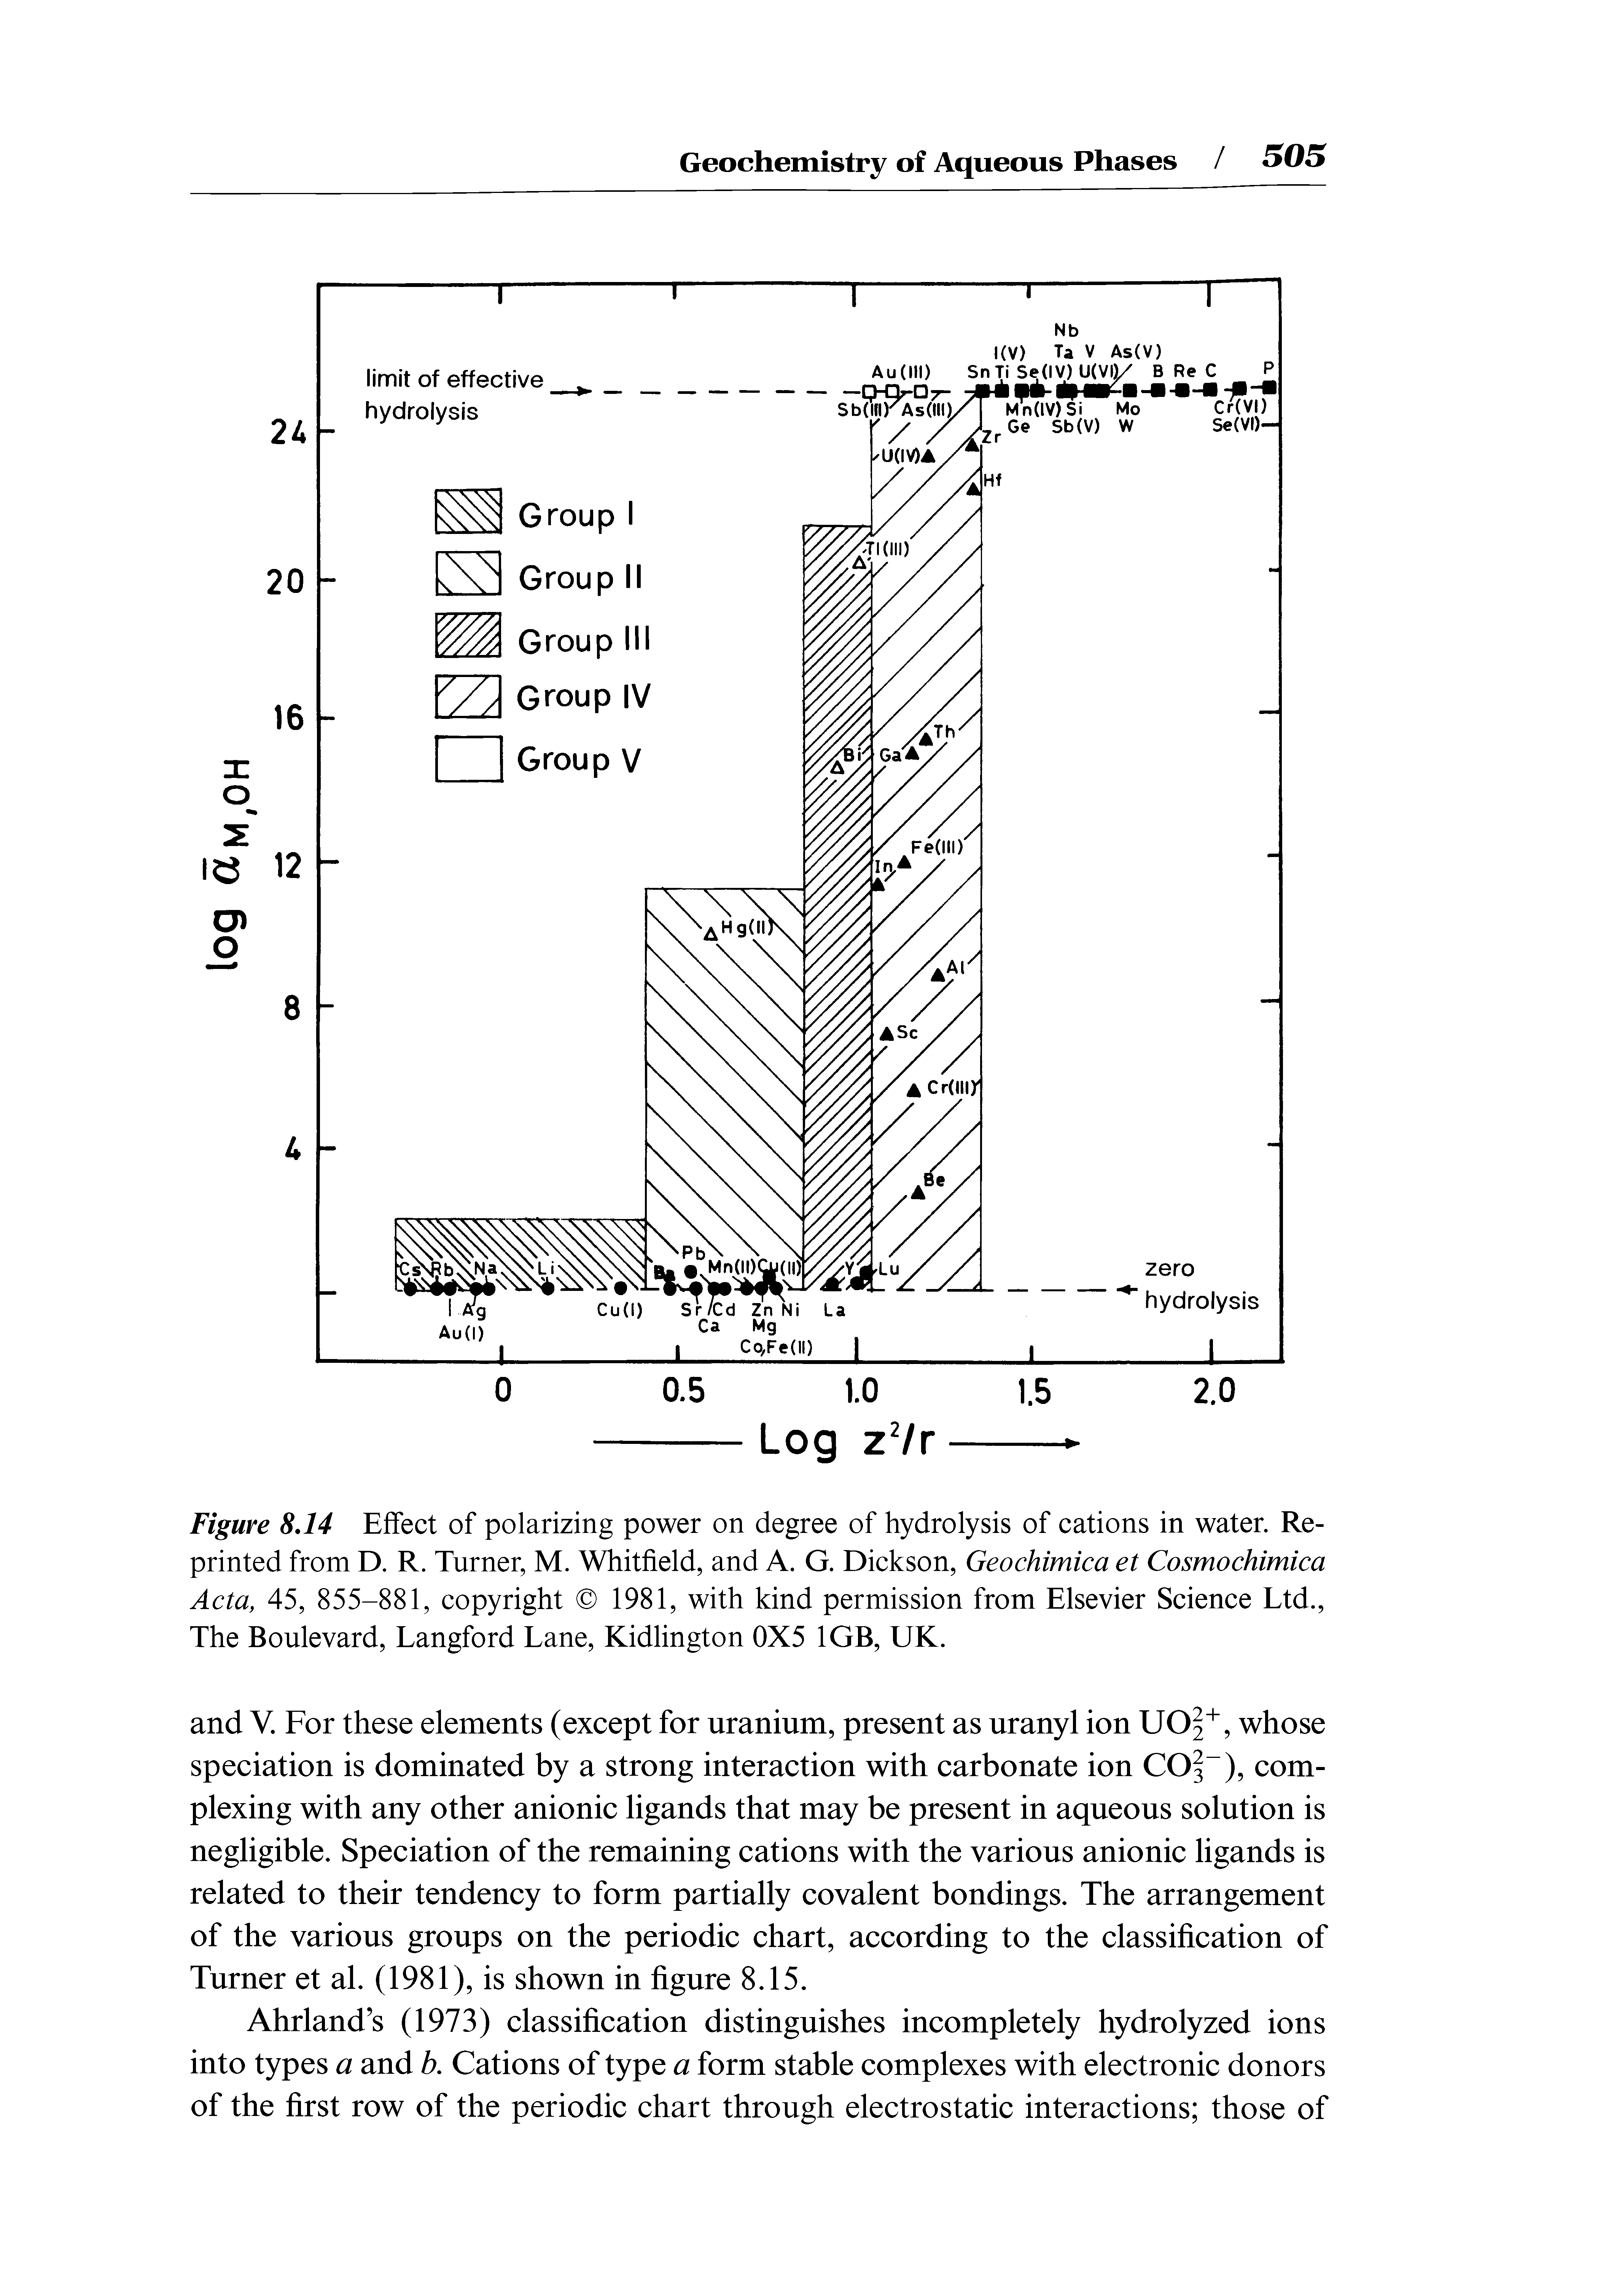 Figure 8.14 Effect of polarizing power on degree of hydrolysis of cations in water. Reprinted from D. R. Turner, M. Whitfield, and A. G. Dickson, Geochimica et Cosmochimica Acta, 45, 855-881, copyright 1981, with kind permission from Elsevier Science Ltd., The Boulevard, Langford Lane, Kidlington 0X5 1GB, UK.